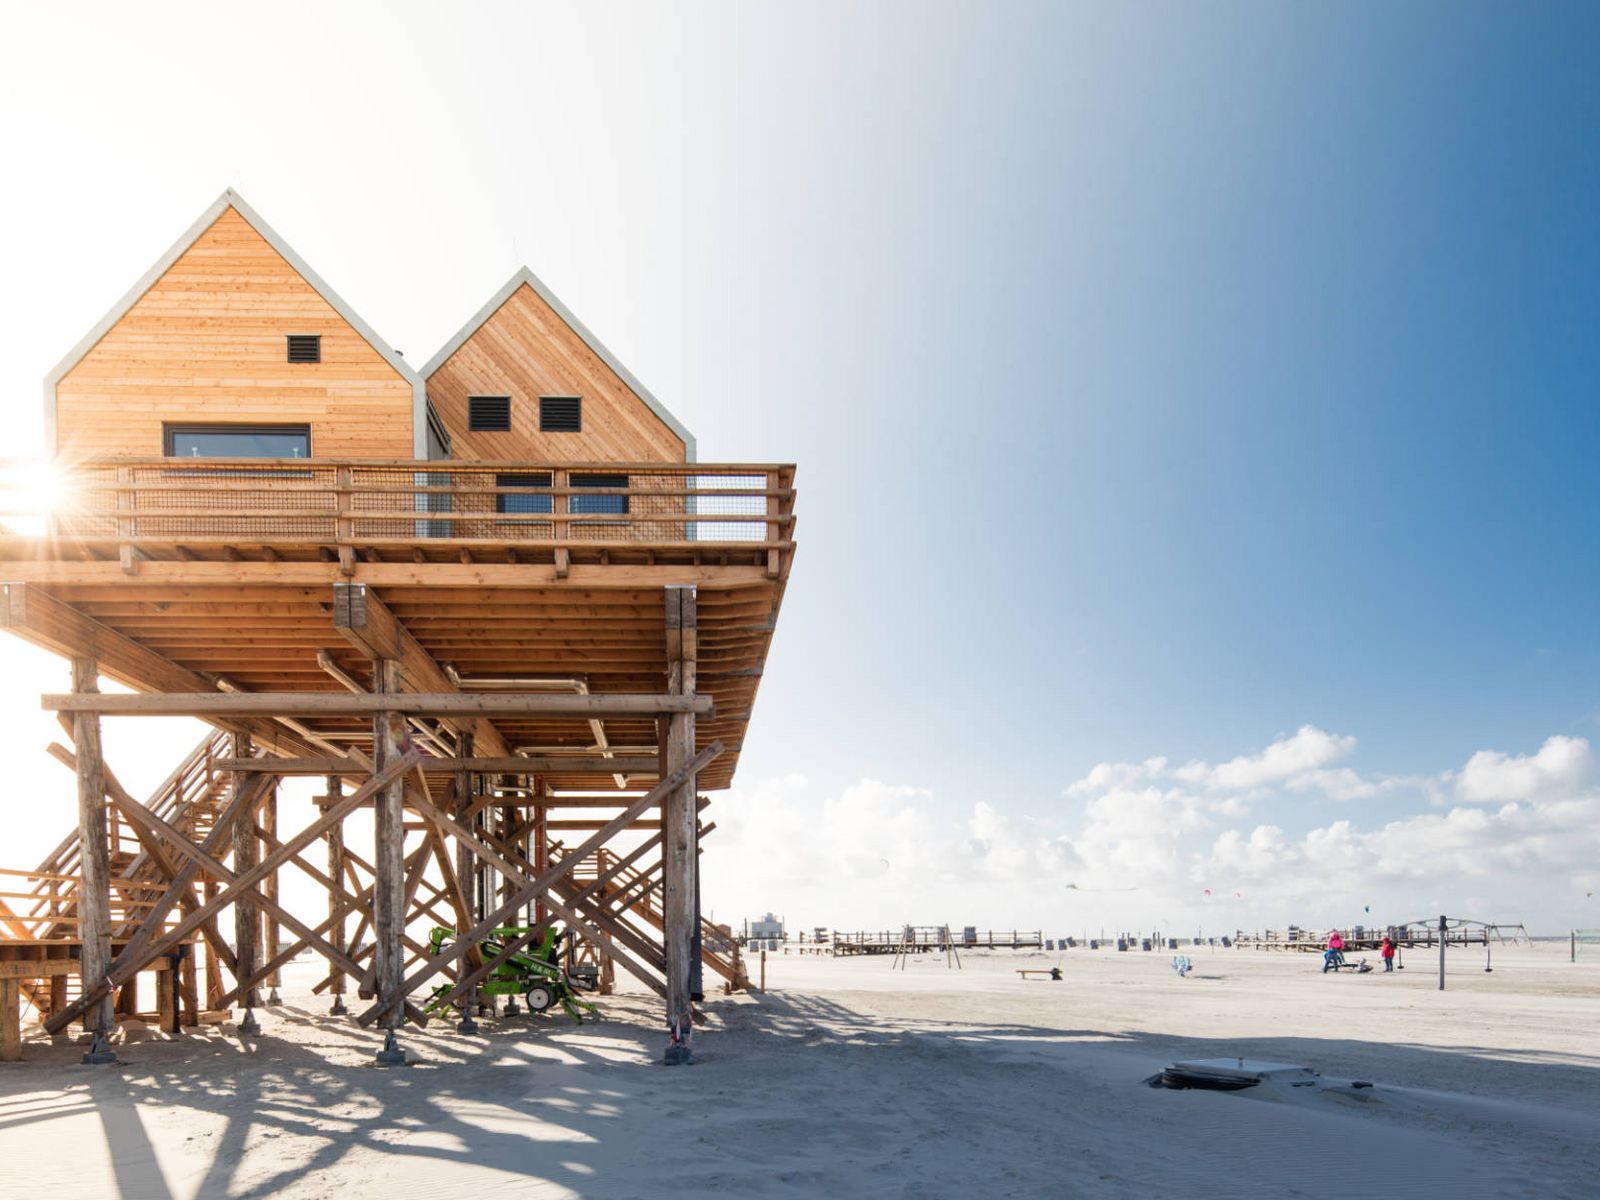 [Translate to Englisch:] St. Peter-Ording Strand mit Haus